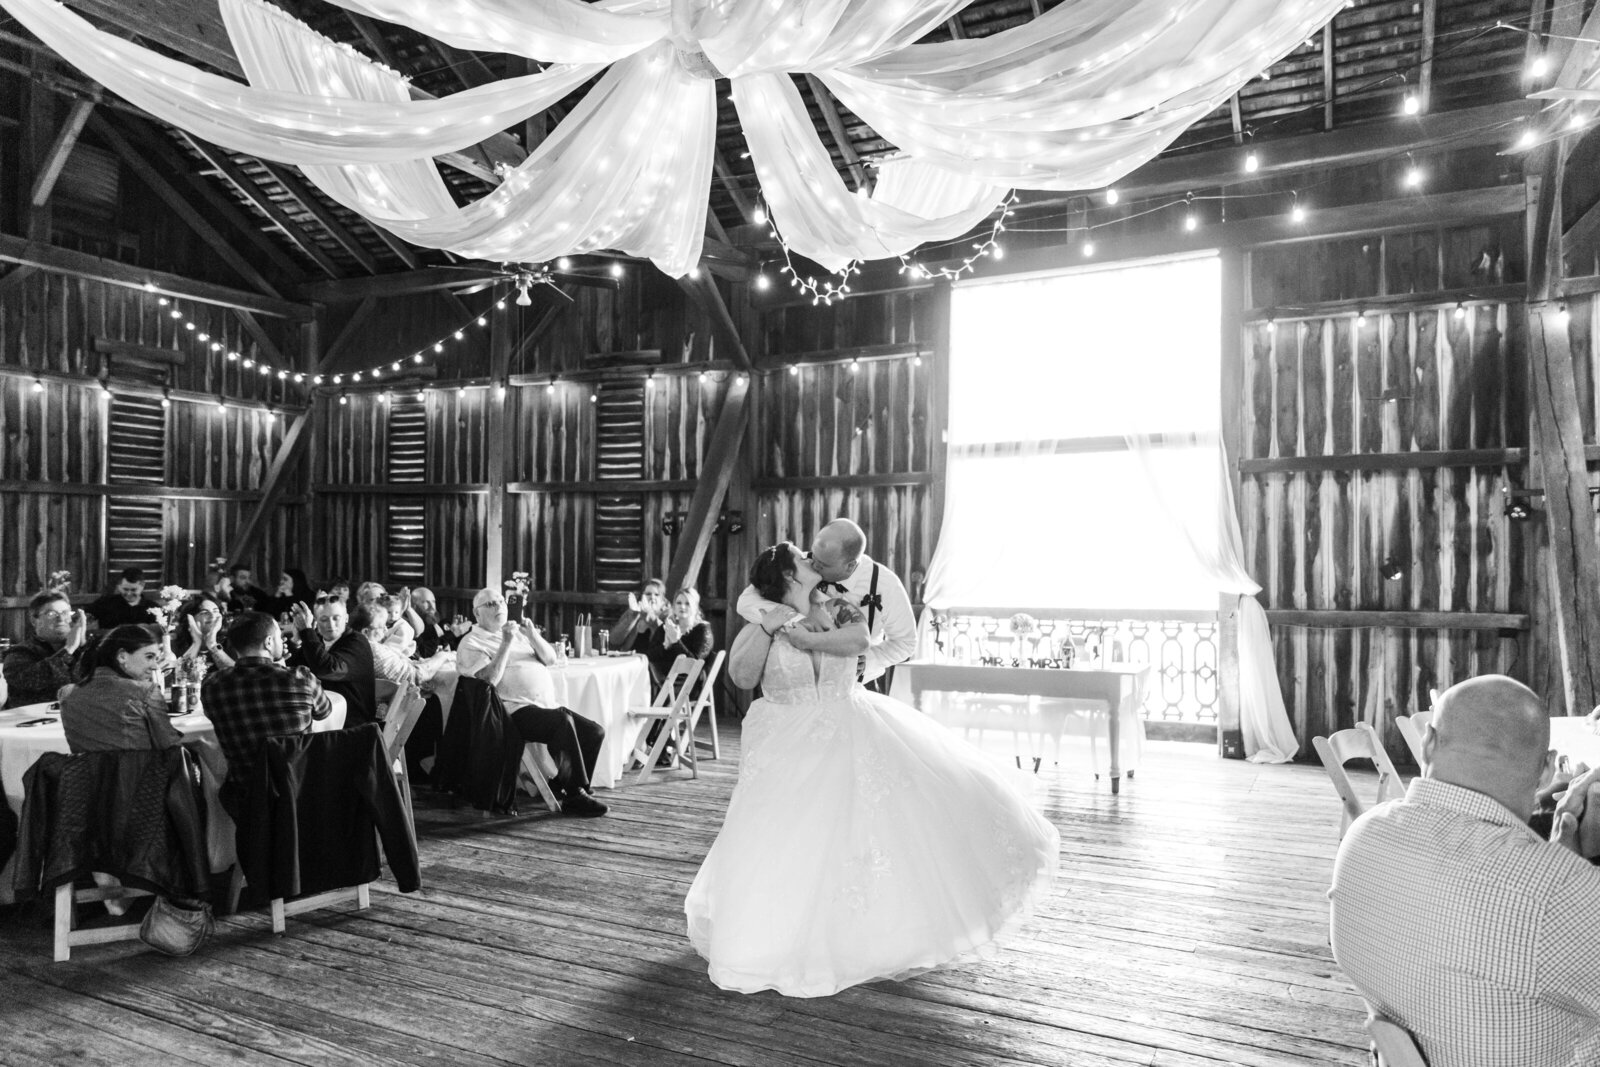 Bride and groom dance in the ohio barn. Photo is a black and white photo taken by dayton wedding photographer